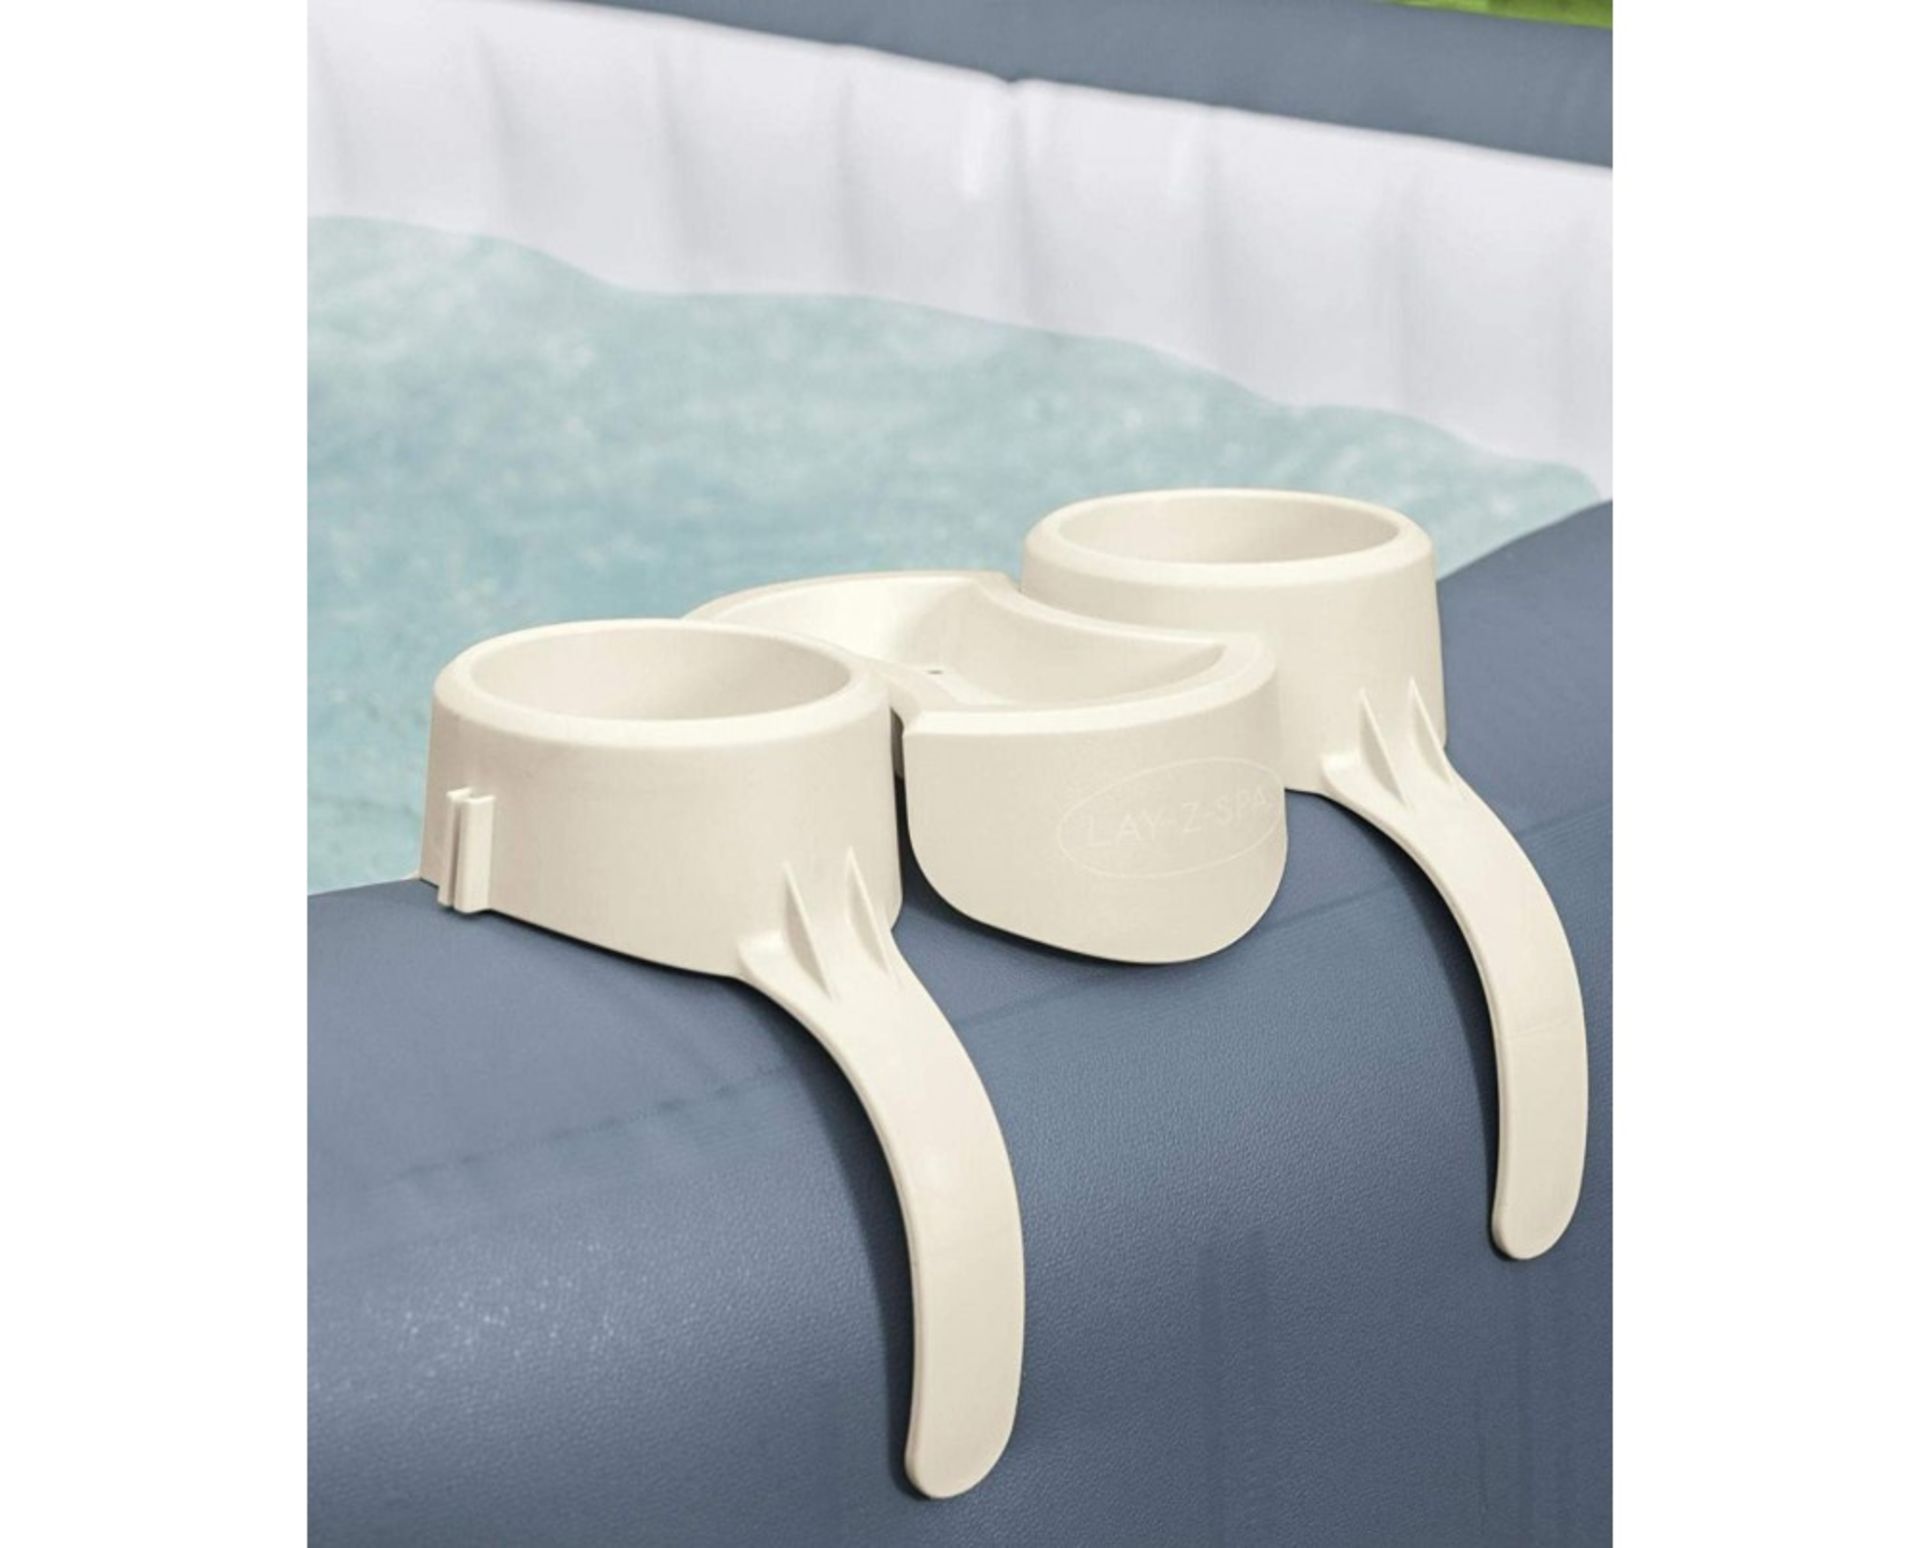 26 X BRAND NEW LAY-Z-SPA EXTRAS HOT TUB DRINKS HOLDER AND SNACK TRAY - CLIPS ON ANYWHERE ON TOP OF - Image 3 of 4